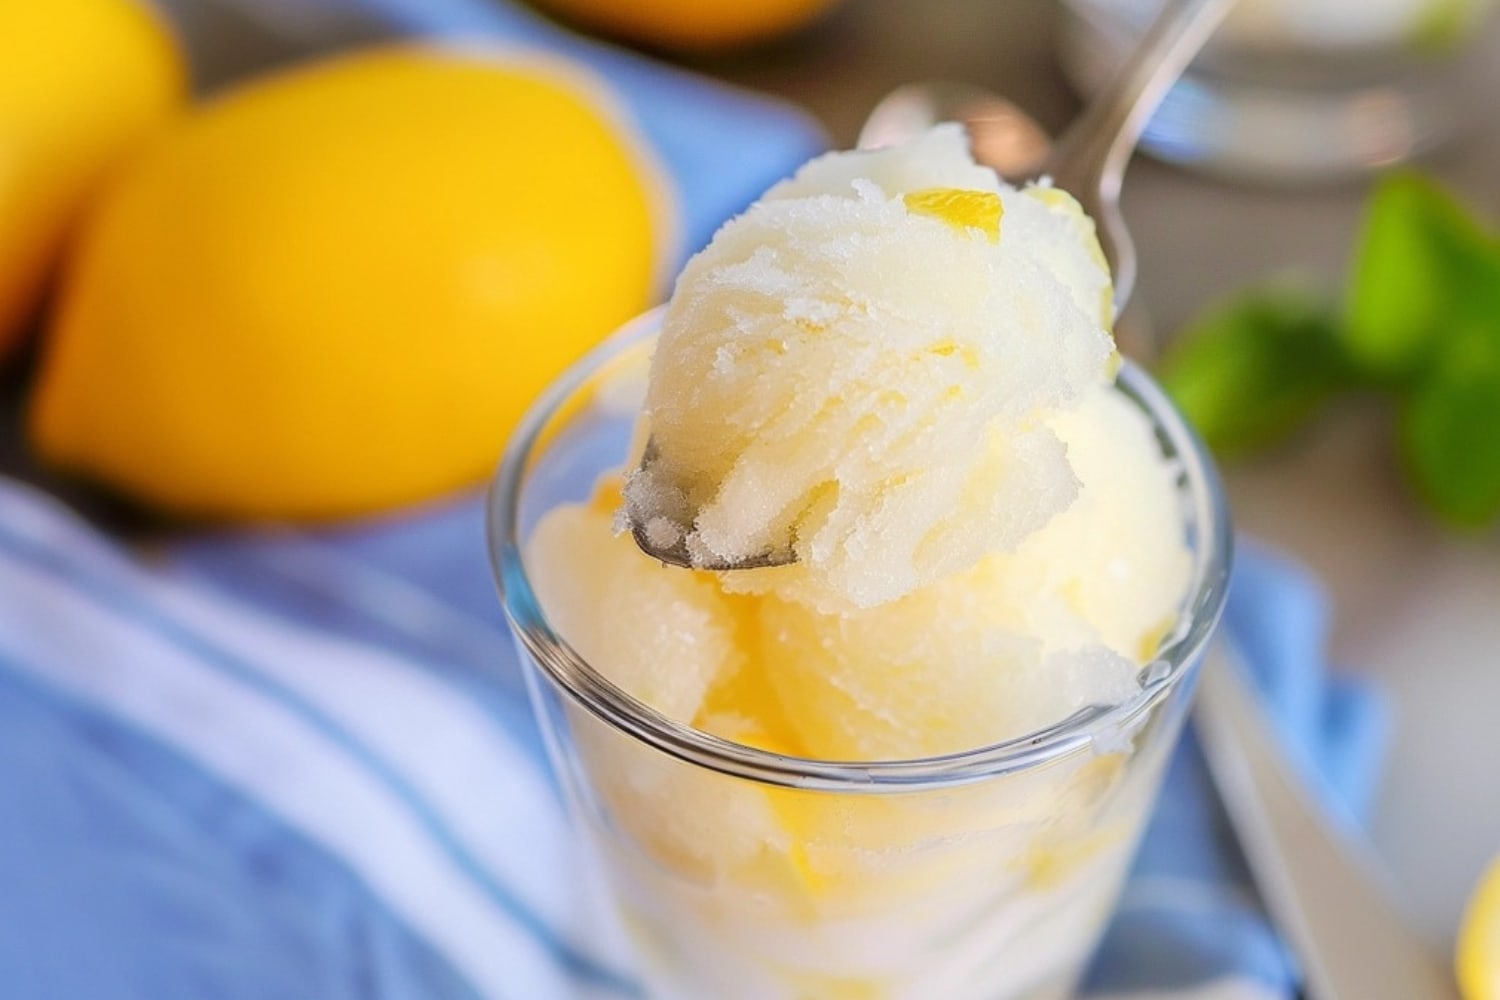 Spoon scooping lemon sorbet served on a glass.